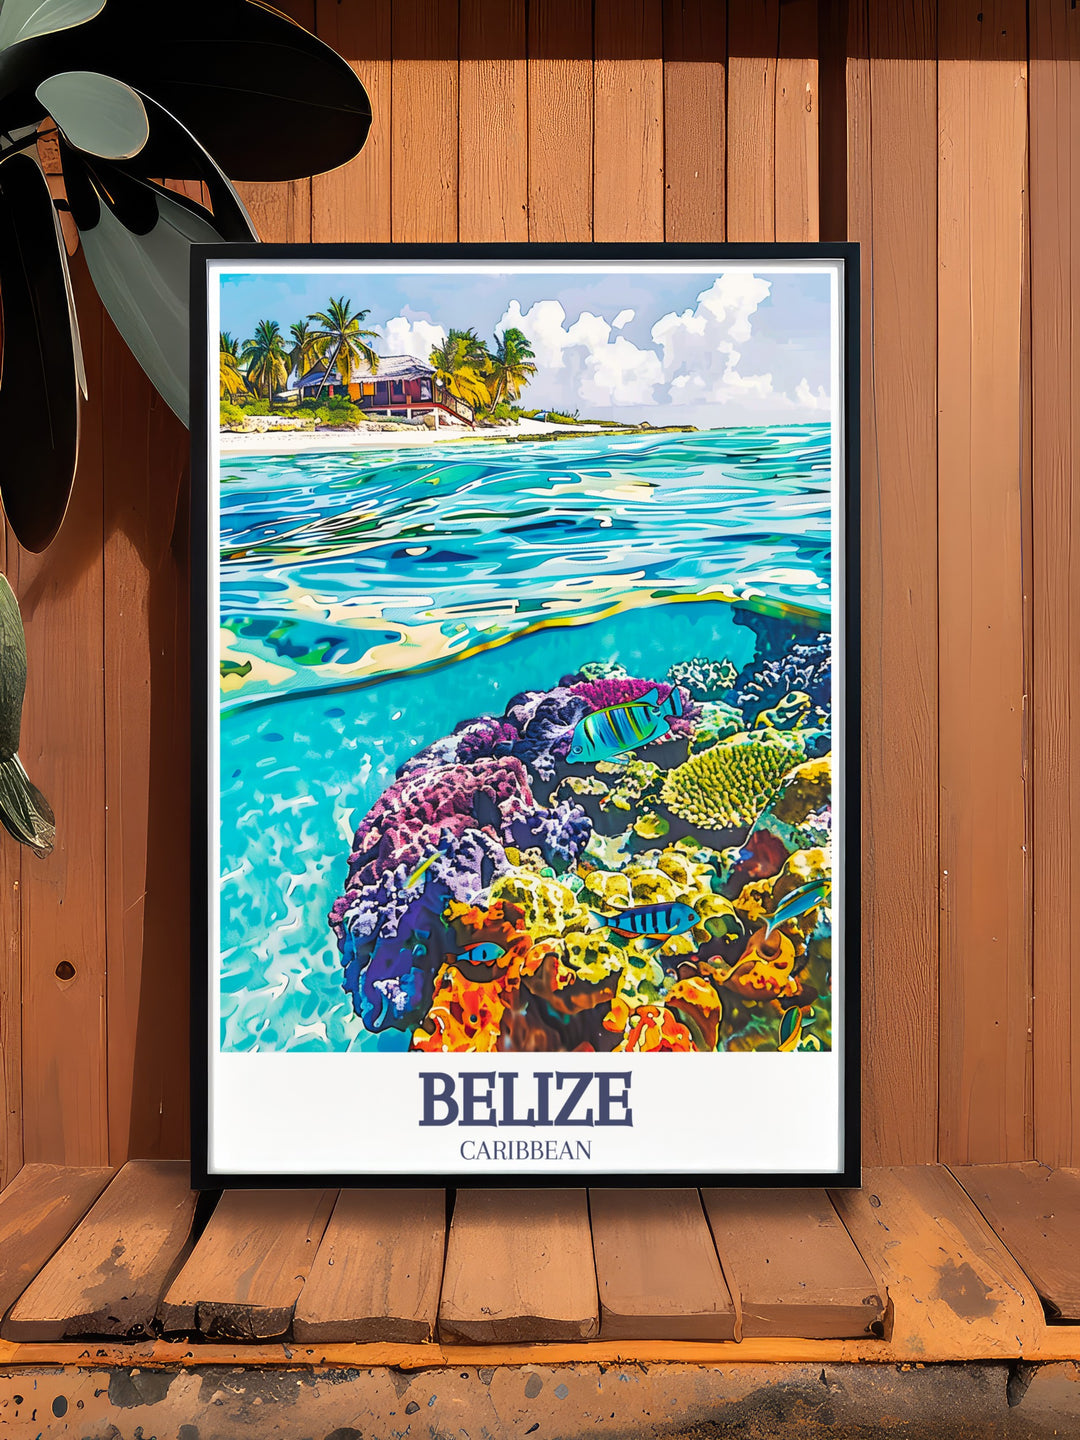 Belize Barrier Reef Belize Coast artwork showcasing the natural beauty and cultural charm of the Caribbean ideal for those who appreciate high quality art and the vibrant energy of tropical destinations